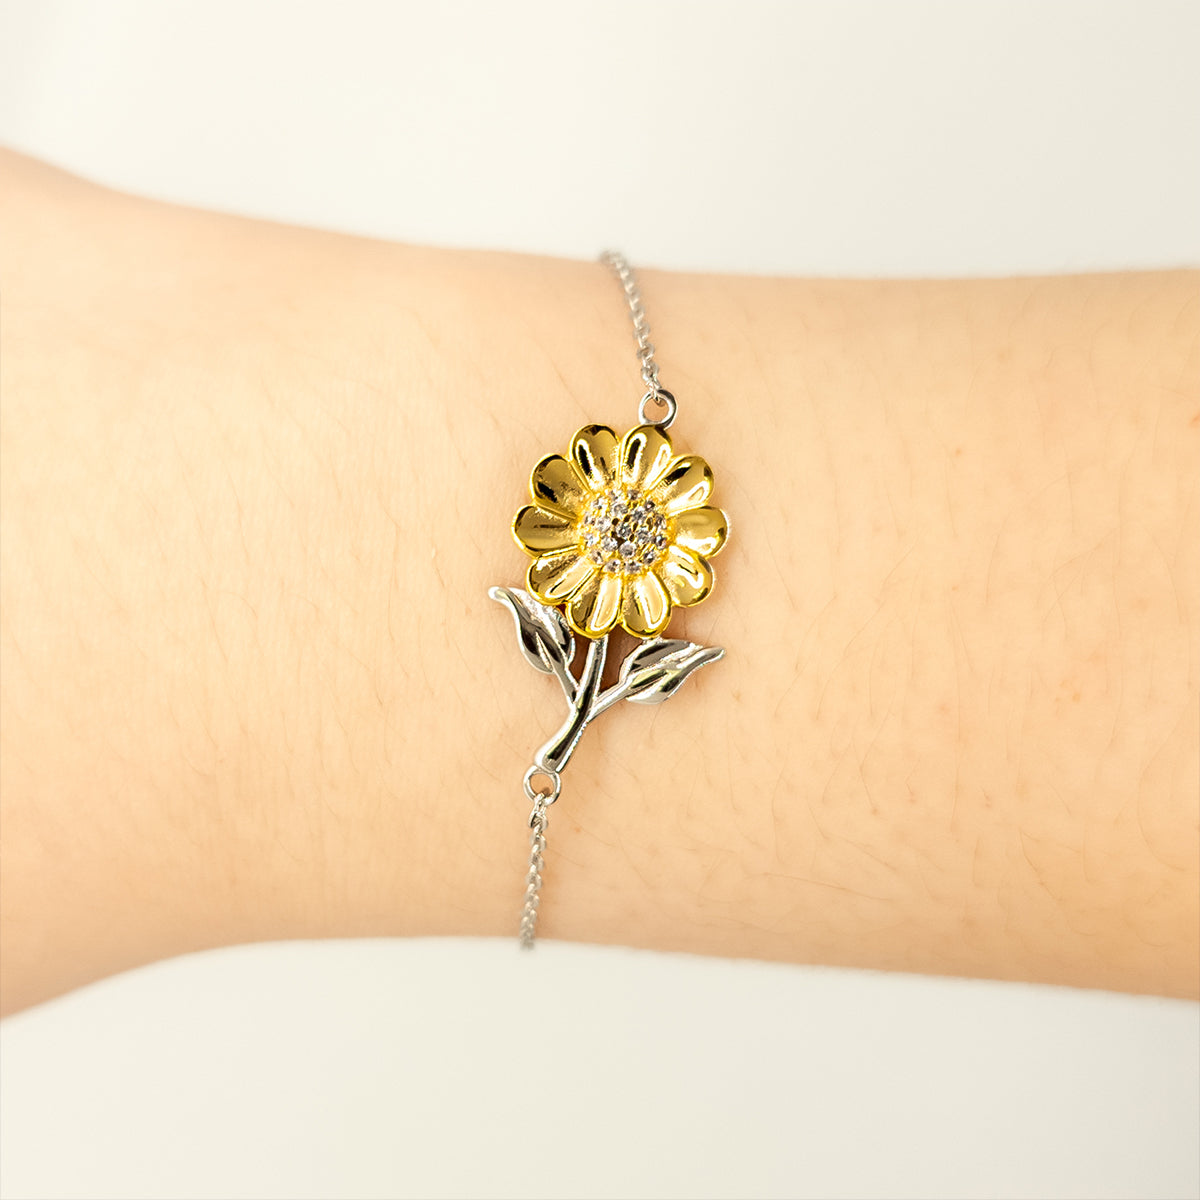 Nephew Motivational Gifts from Auntie, Remember to never give up no matter what, Inspirational Birthday Sunflower Bracelet for Nephew